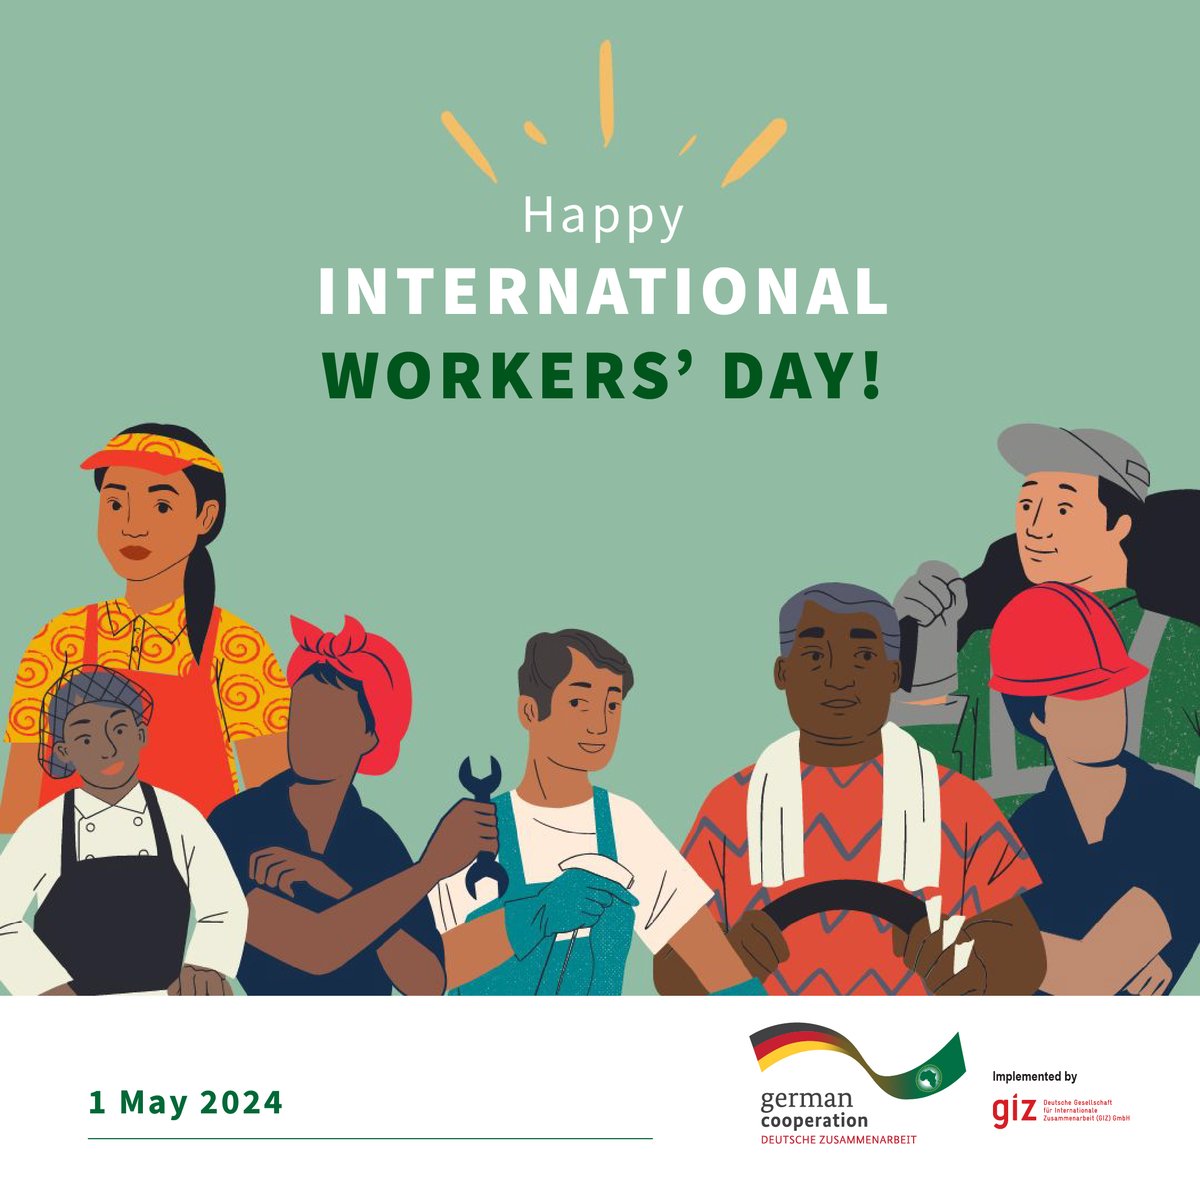 Happy #InternationalWorkersDay! On this day, we recognise the invaluable skills #LabourMigrants bring to the economies they serve! Let's advocate for better #skills recognition& transfer systems across #Africa, so labour migrants can harness their full potential.💼🌍 #LabourDay